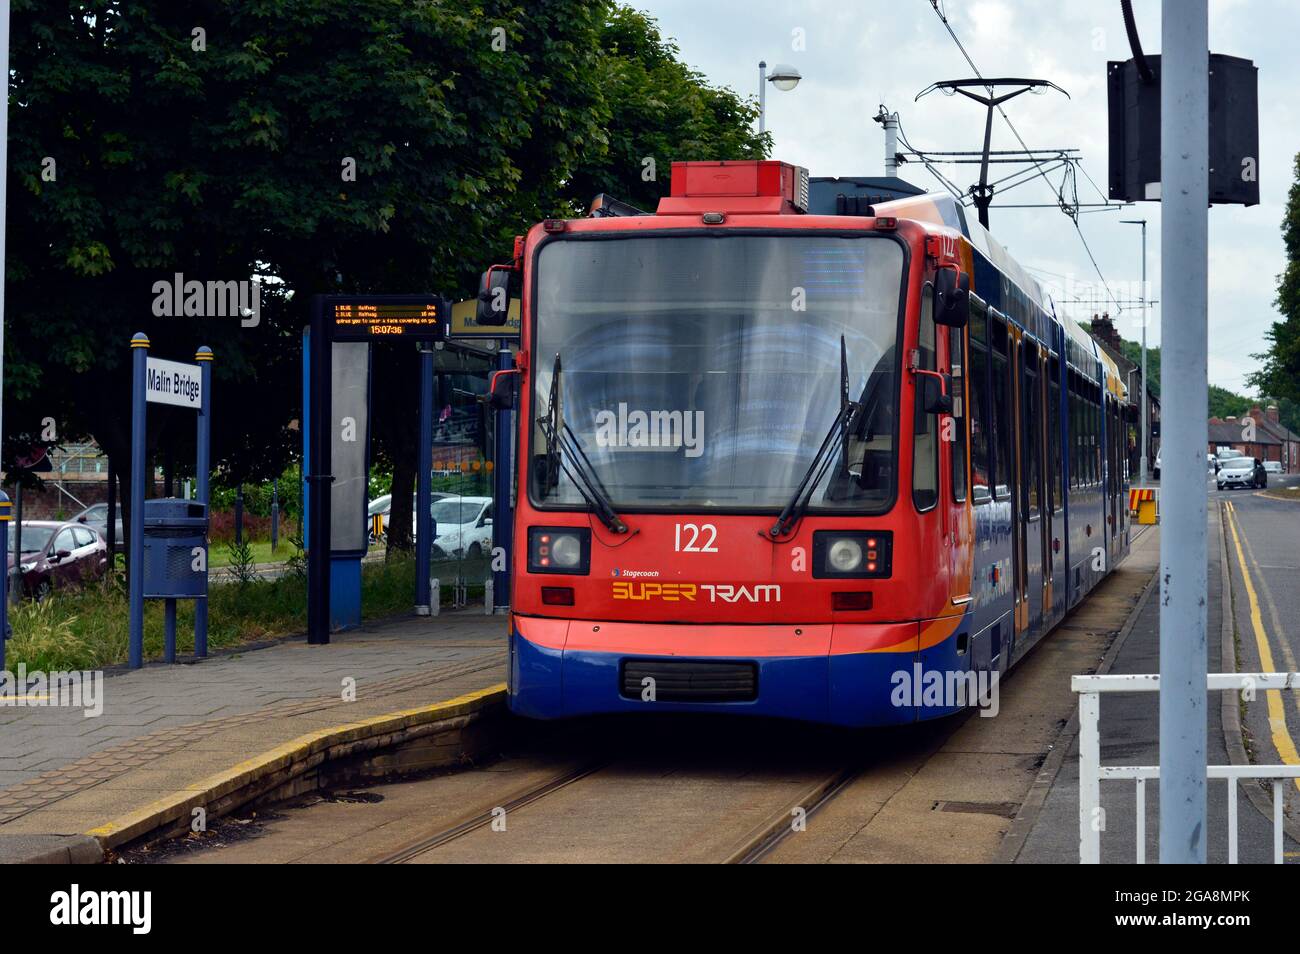 SHEFFIELD. SOUTH YORKSHIRE. ENGLAND. 07-10-21. Malin Bridge in the city's suburbs is a terminus for the city's light rail tram system. Stock Photo